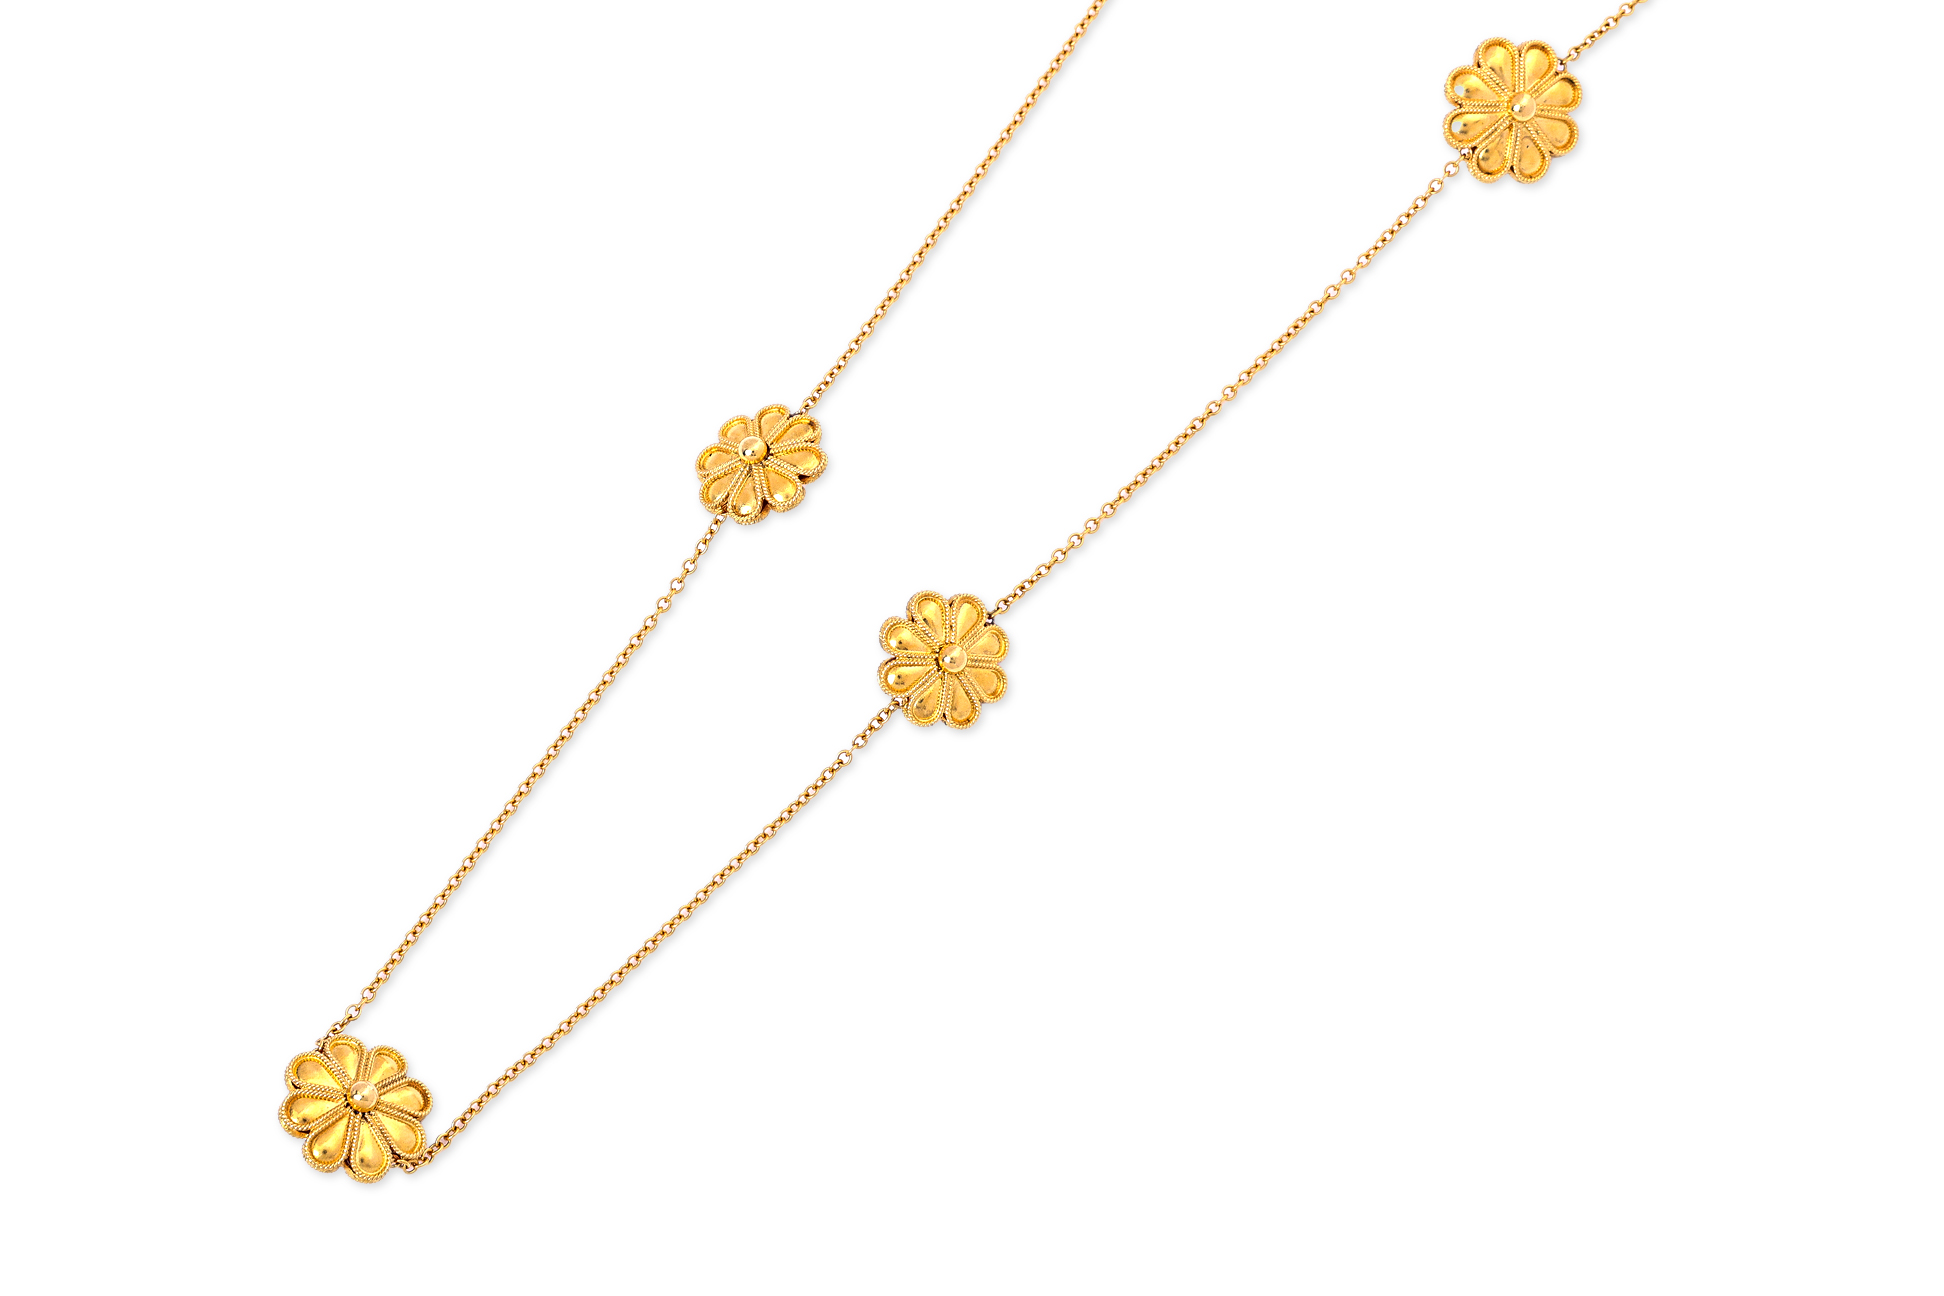 A LONG GOLD FLOWER NECKLACE